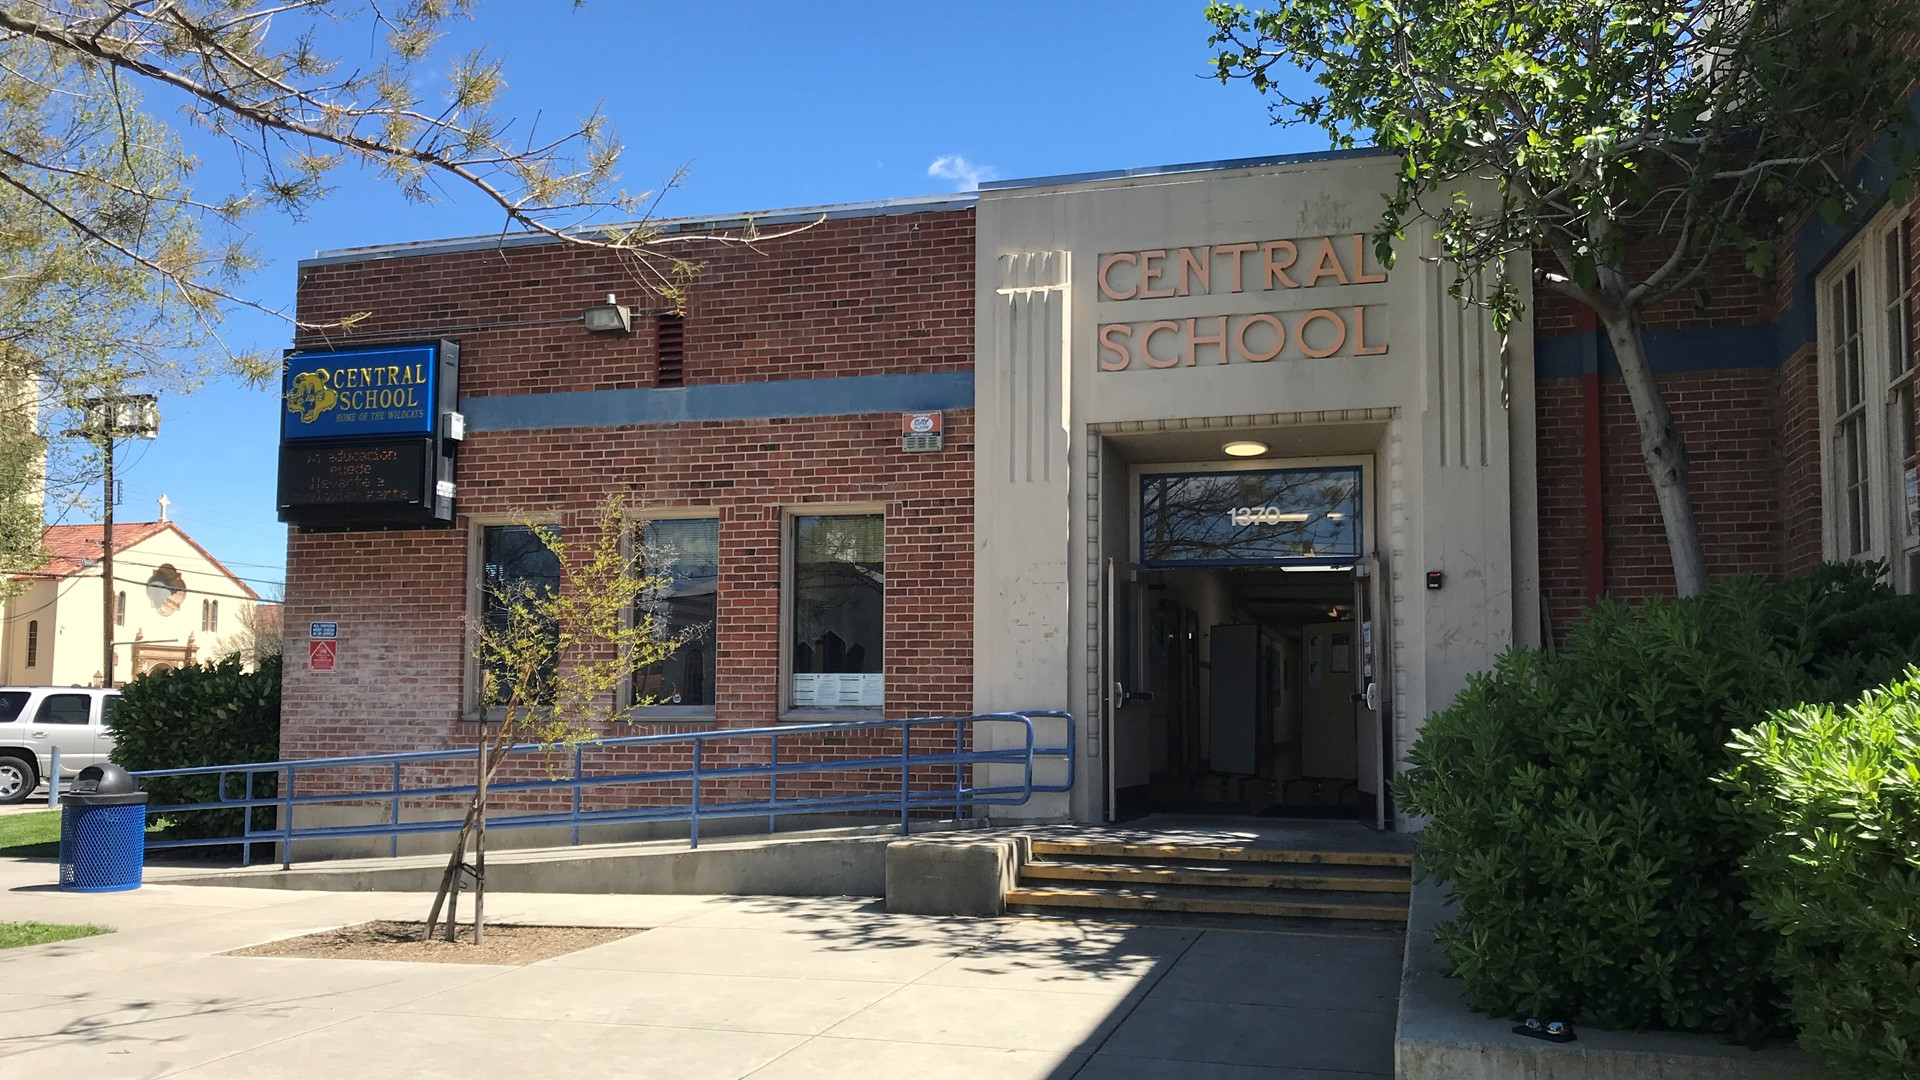 Students and staff at the Central School will be moving into their brand new $30 million building next door after spring break, but the old building will leave behind quite a bit of sentimental value.